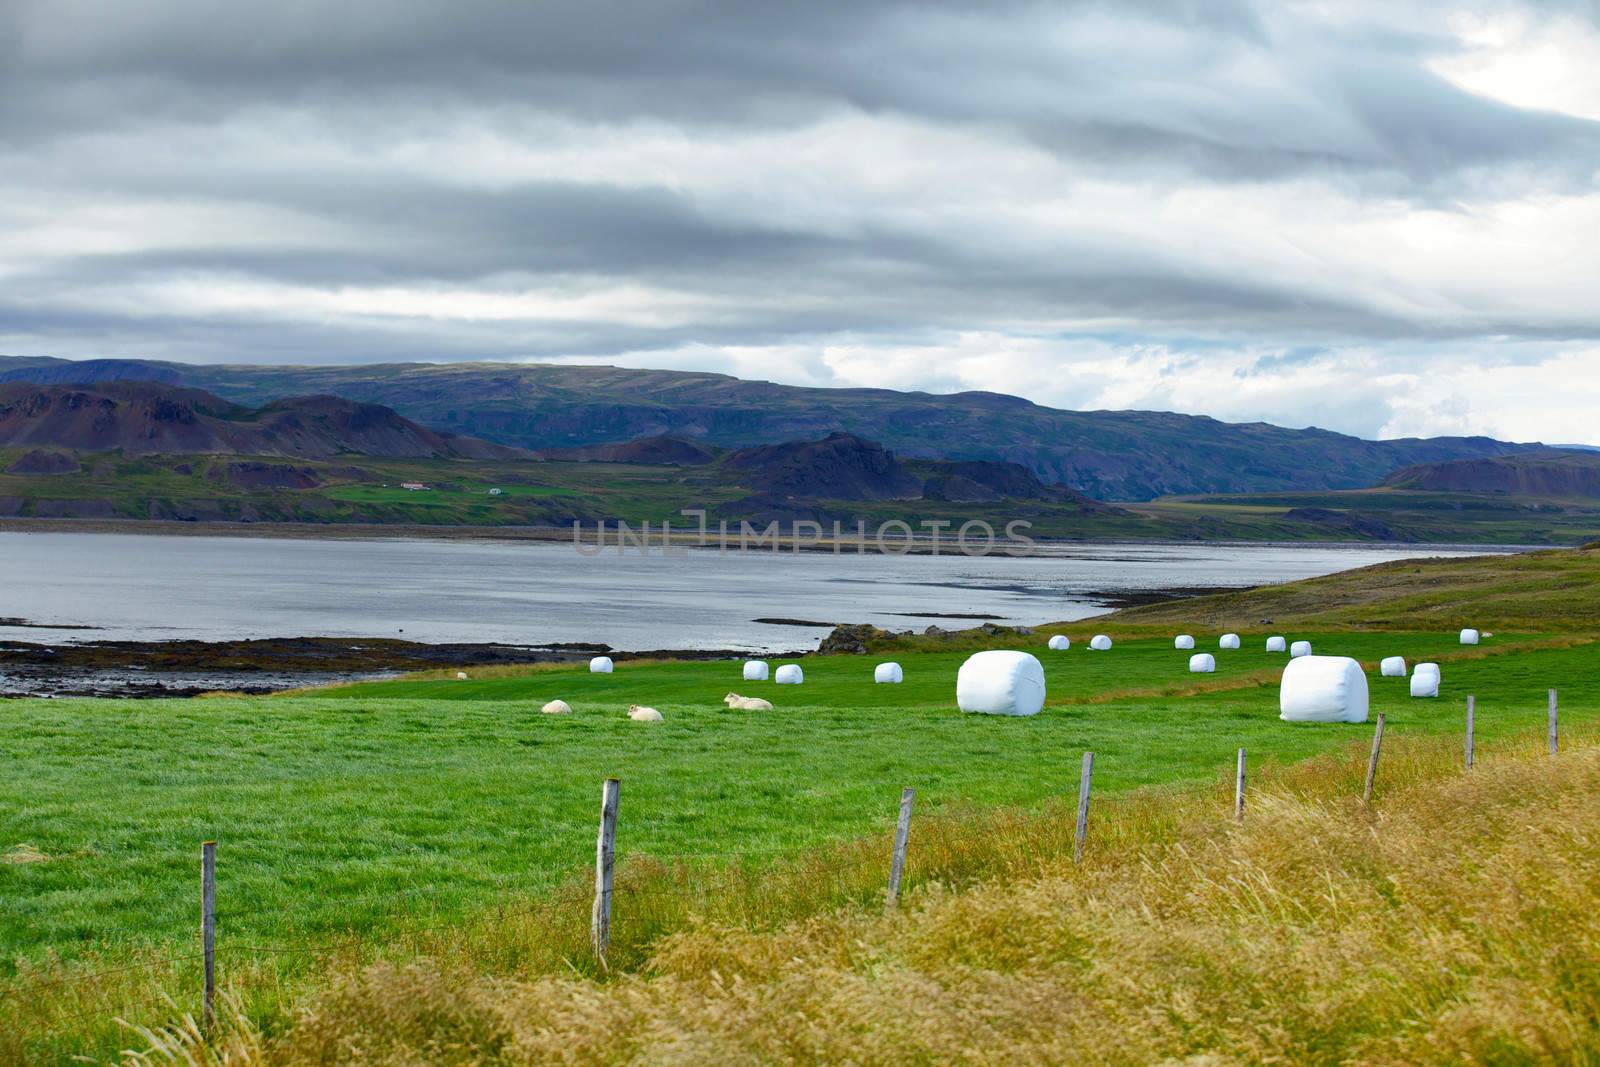 Hay bales in white plastic on the meadow. Iceland